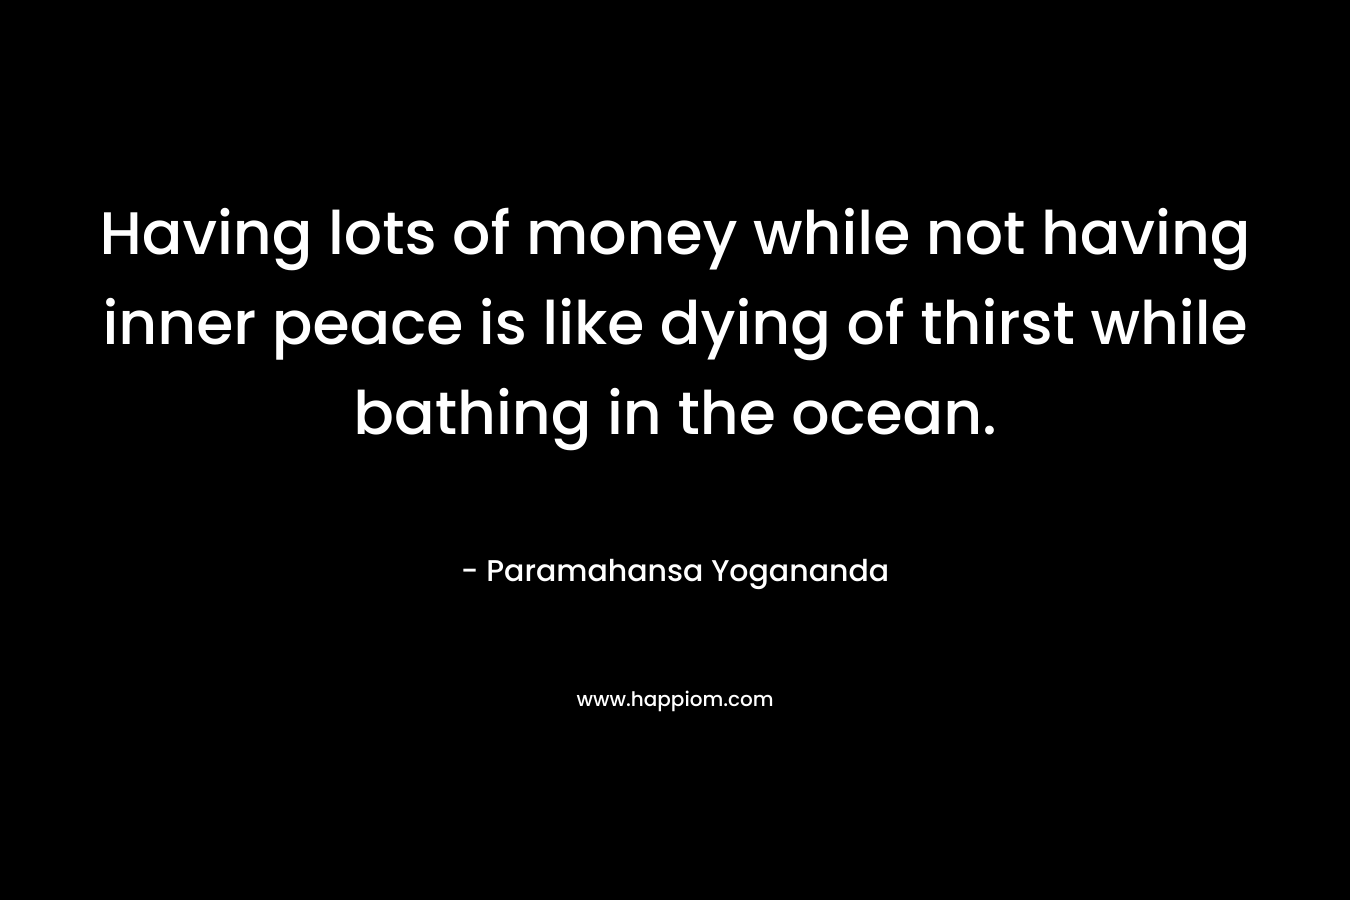 Having lots of money while not having inner peace is like dying of thirst while bathing in the ocean. – Paramahansa Yogananda